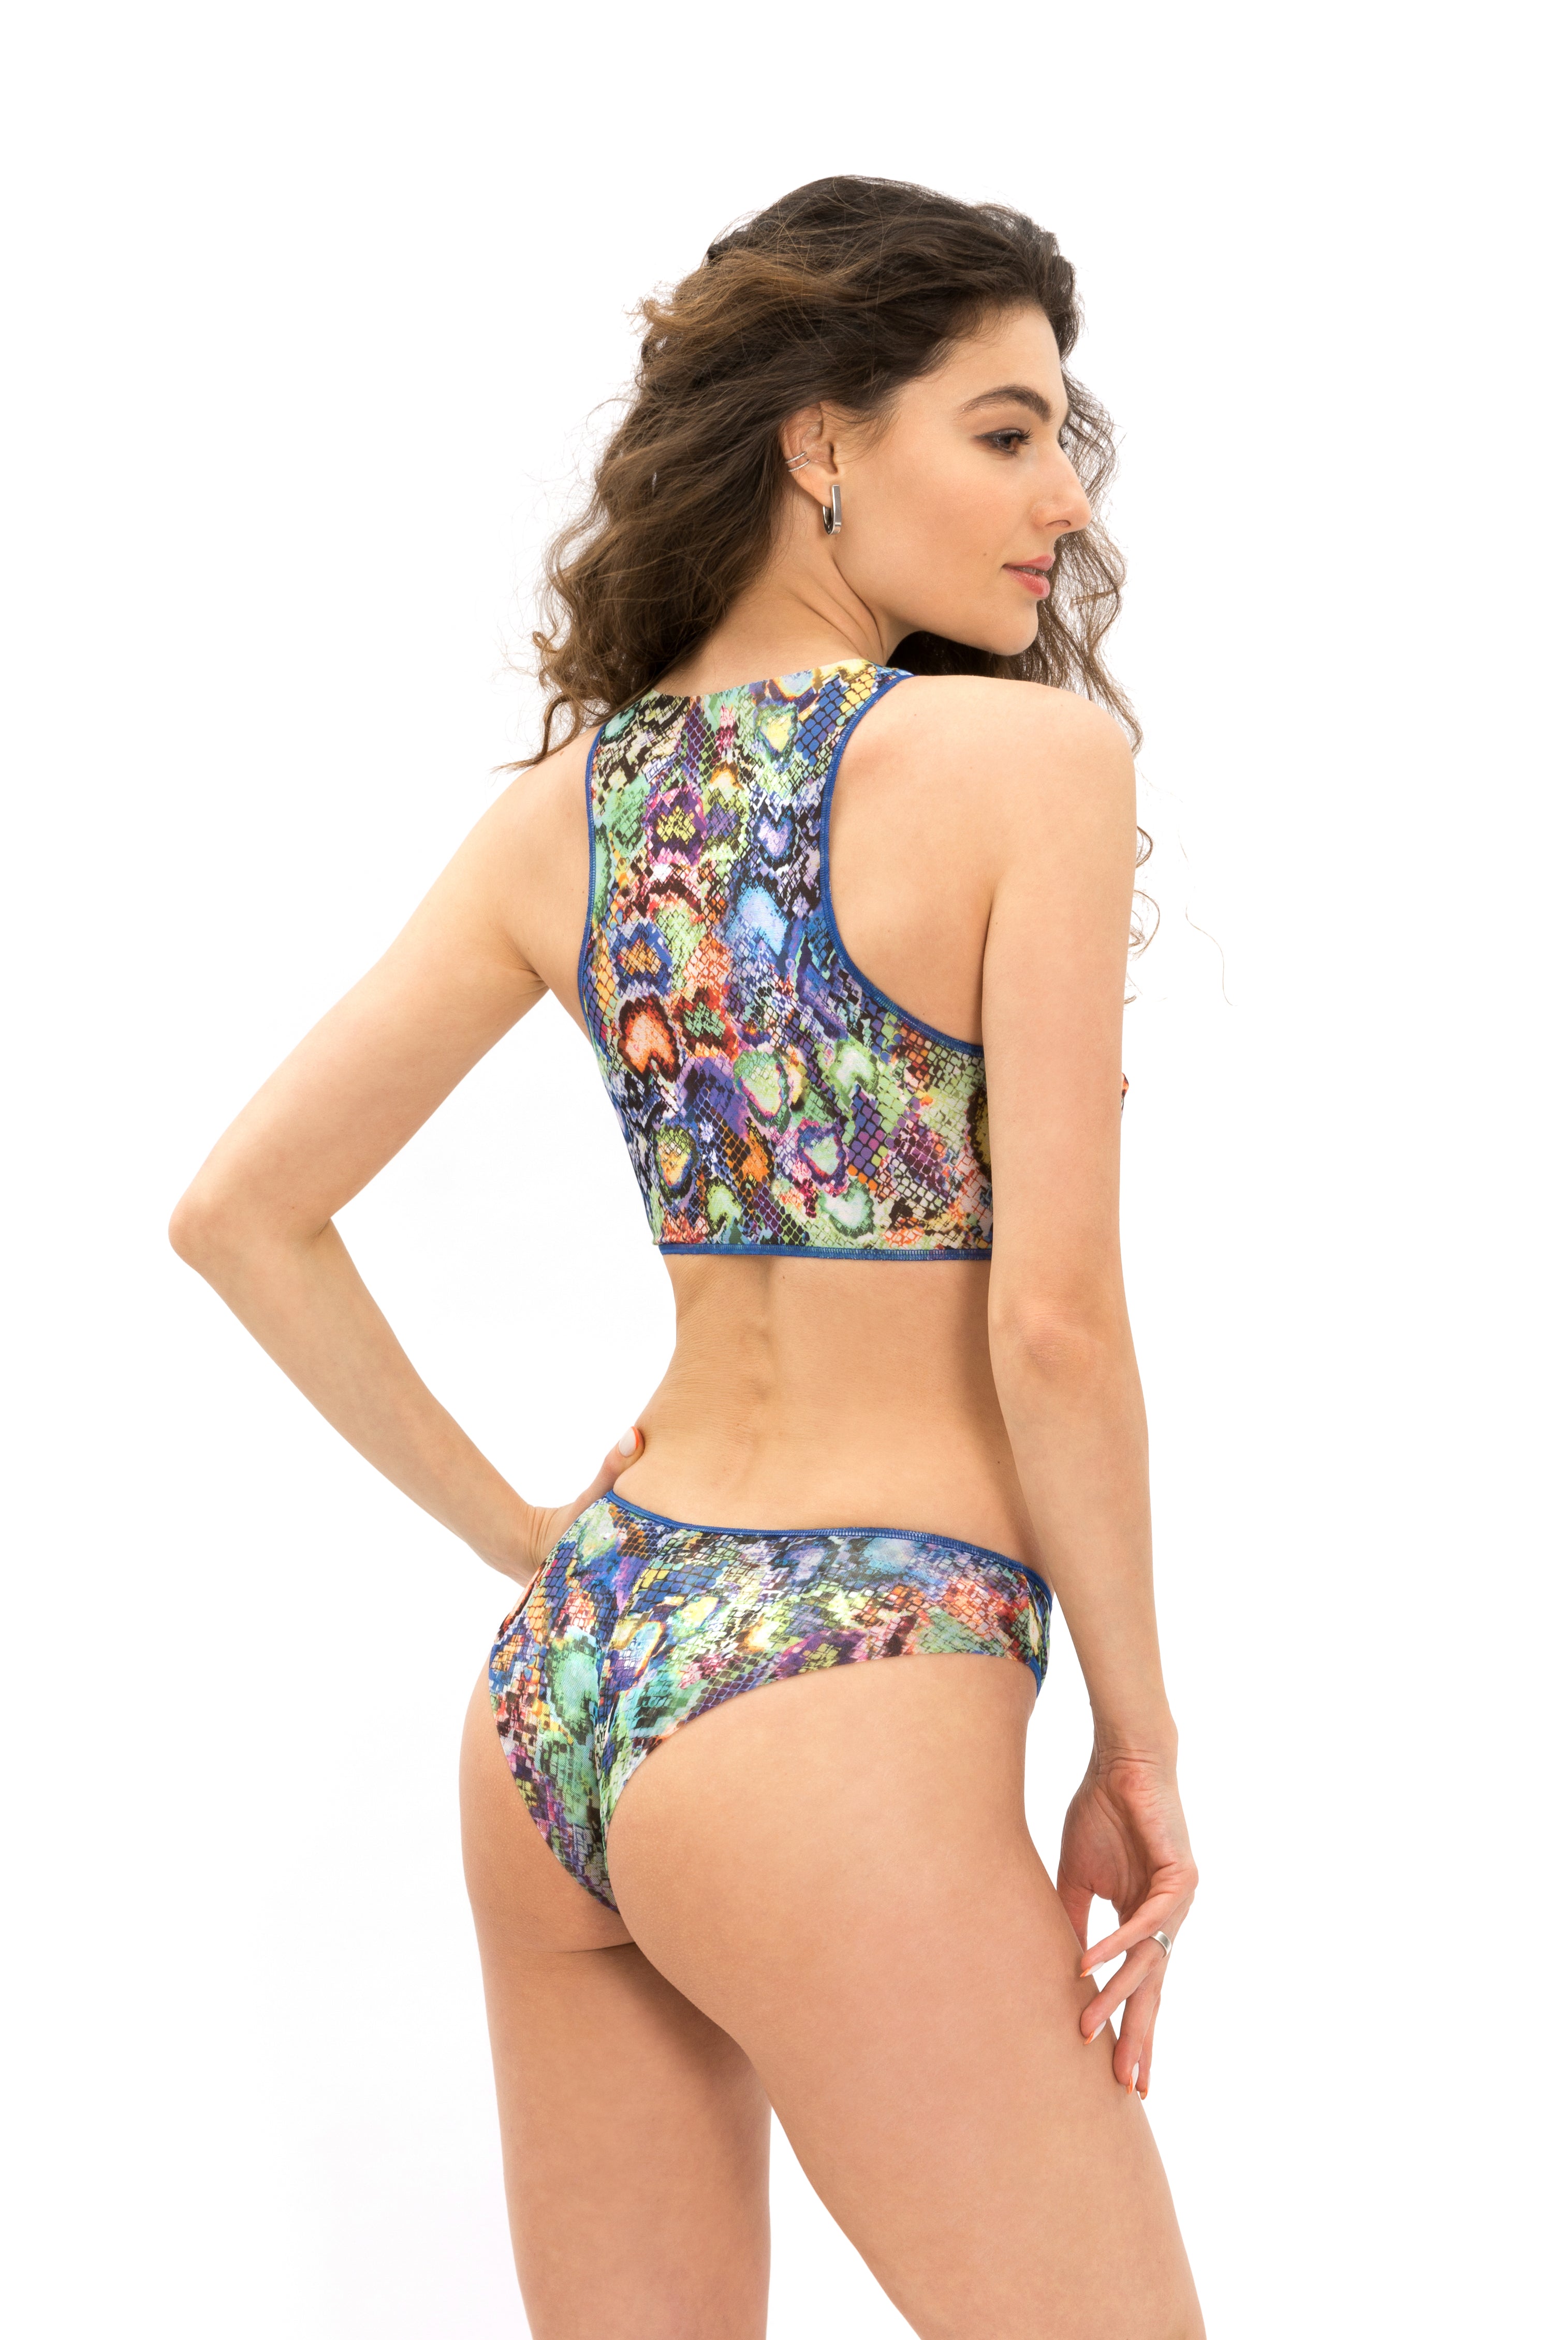  Discover stylish and sustainable smart swimsuits featuring a snake print design. The collection includes swim tops with SPF35 protection, offering classic luxury. Shop now and enjoy exclusive sale offers!